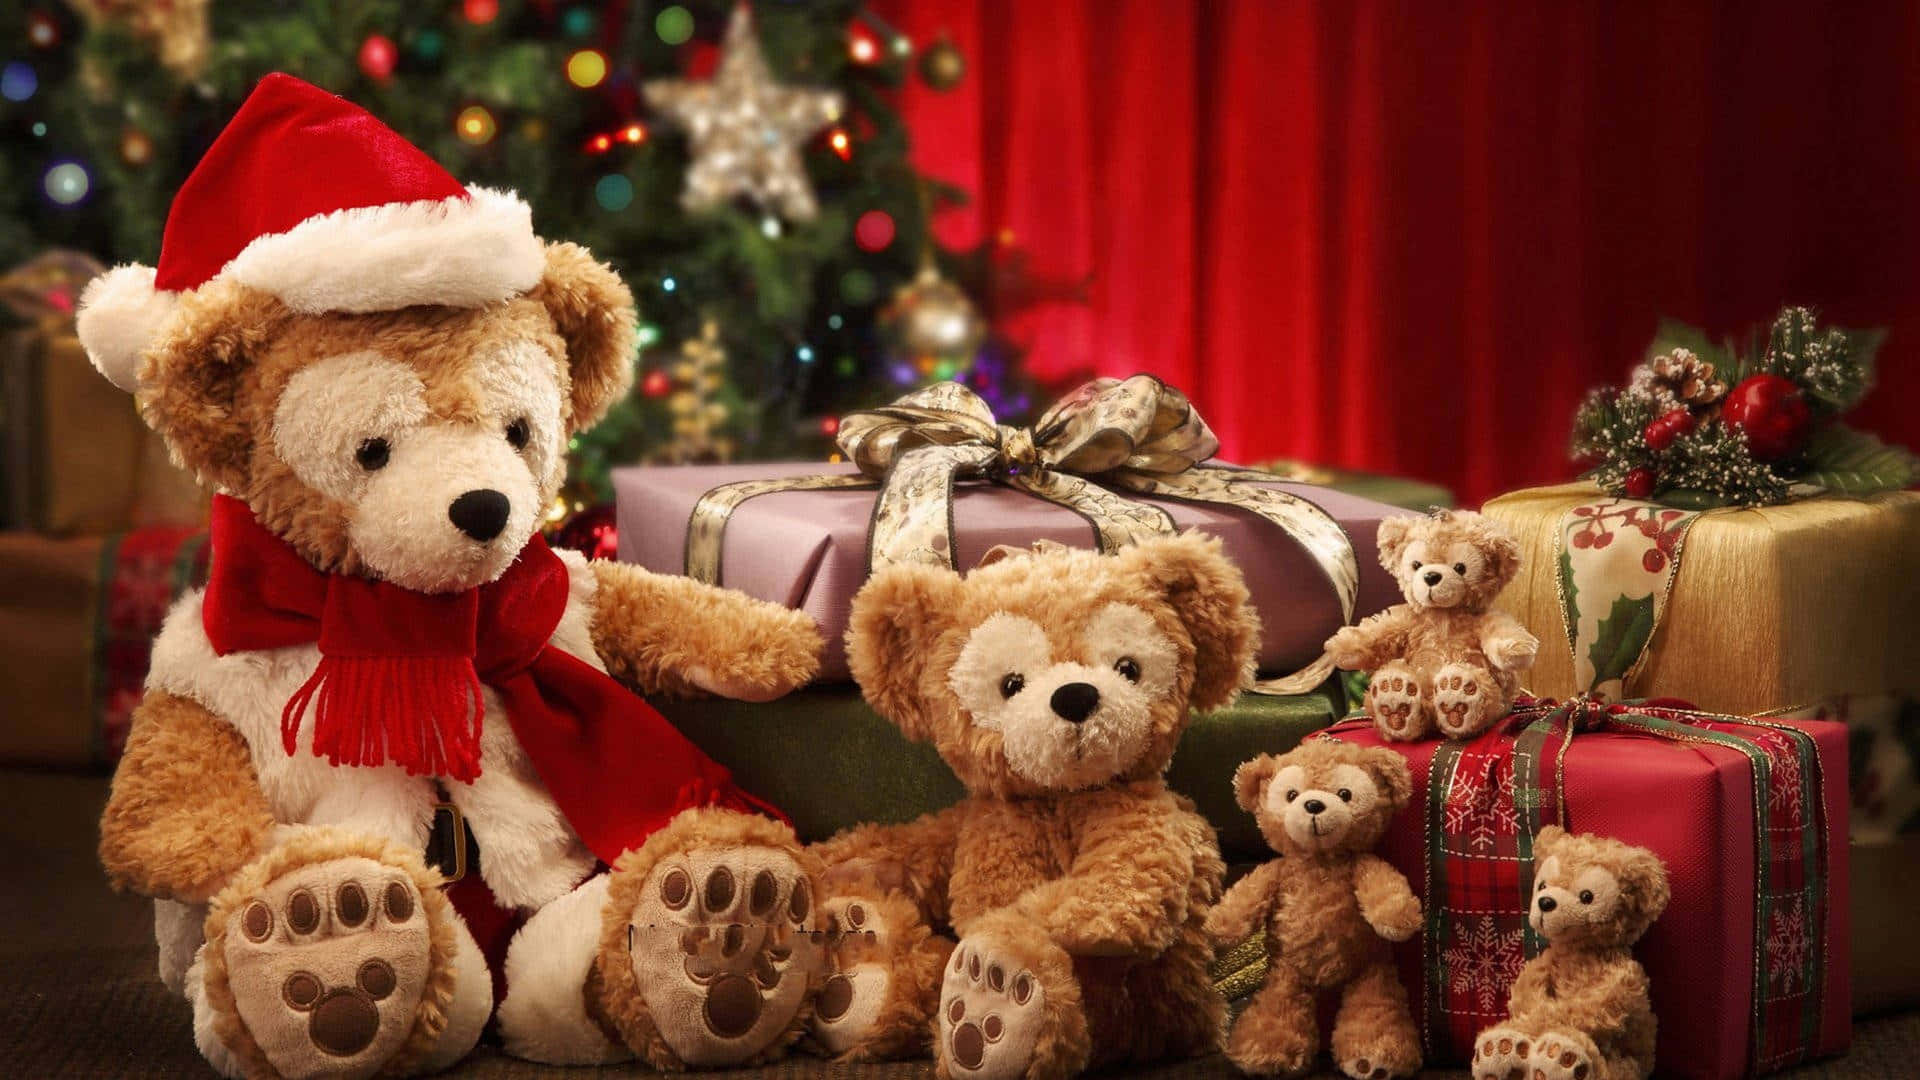 Teddy Bears In Christmas Hats Sitting Next To Presents